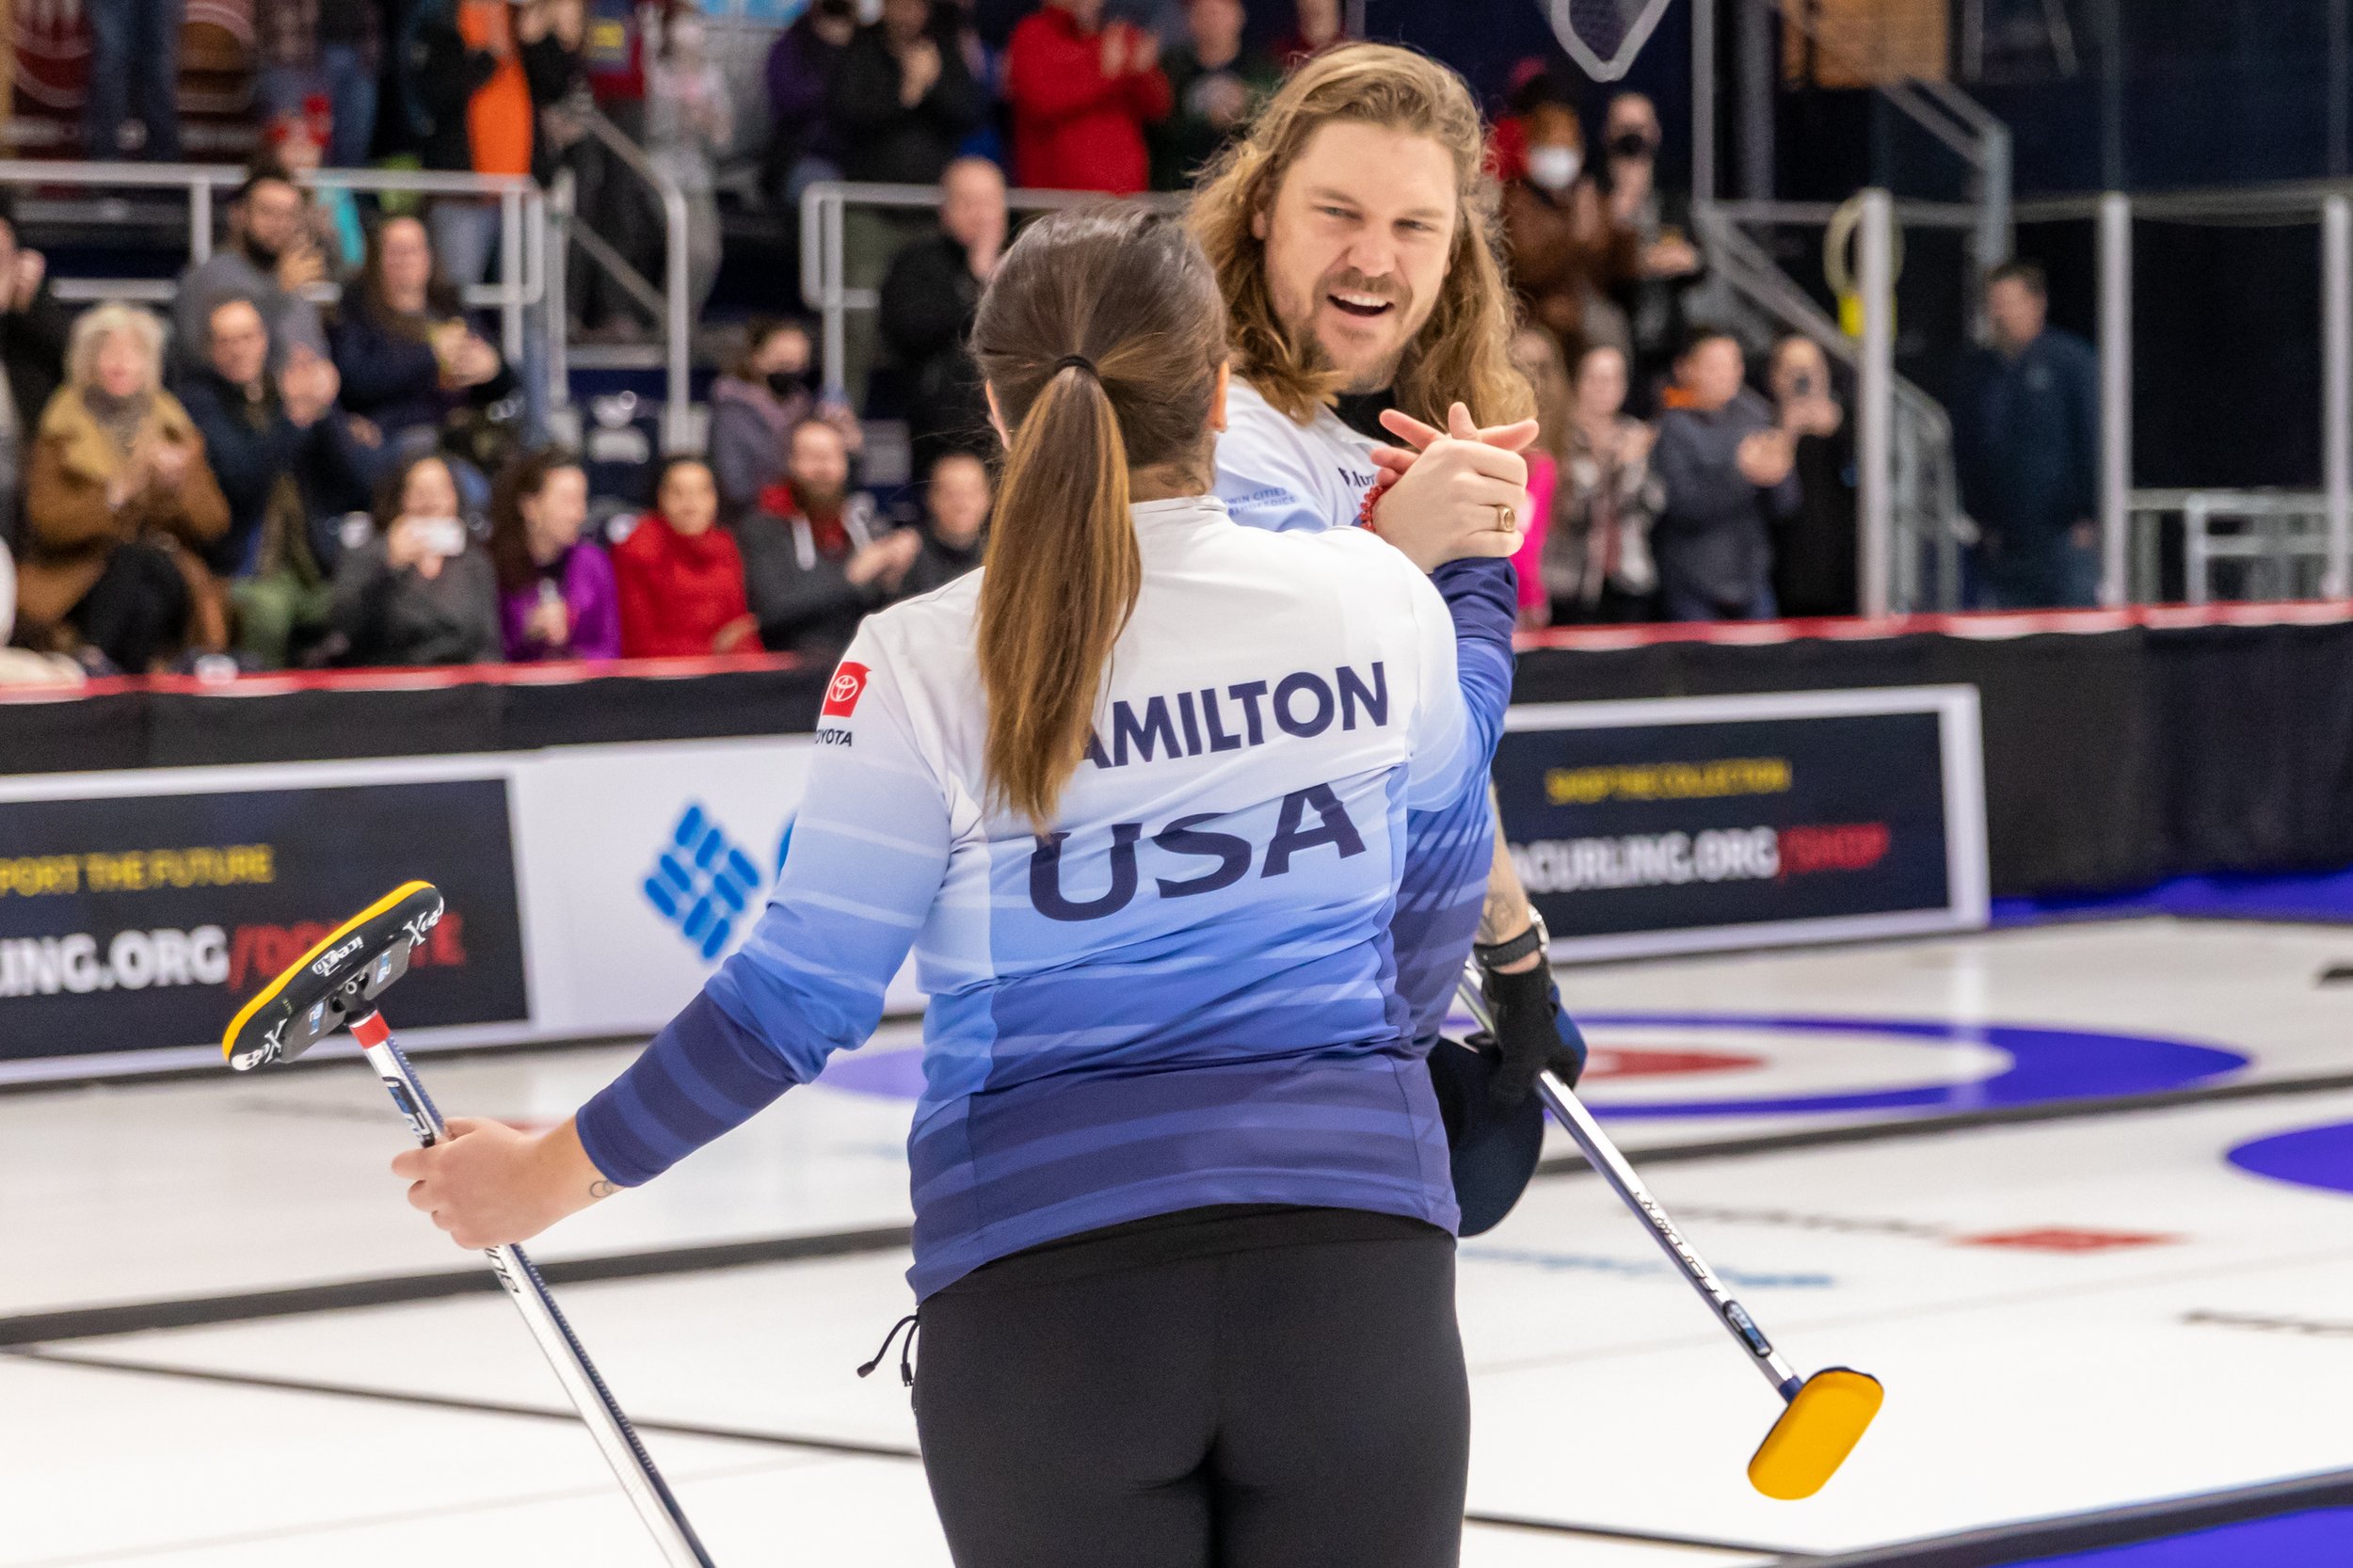 TEAM USA SCHEDULE AT WORLD MIXED DOUBLES CURLING CHAMPIONSHIP 2022 — USA CURLING